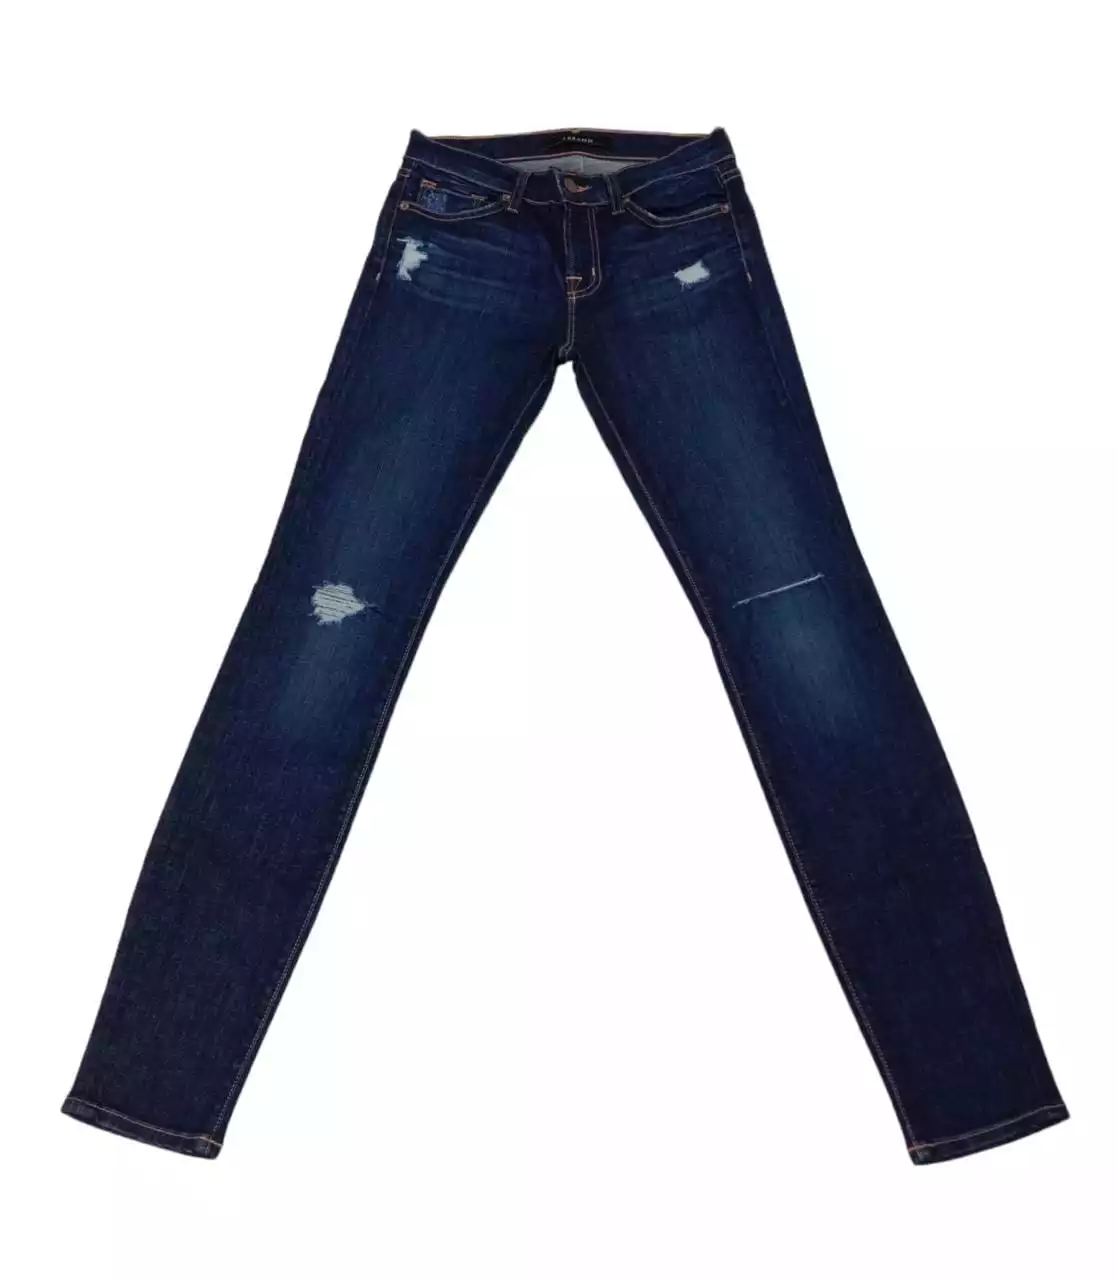 Jeans by Jbrand